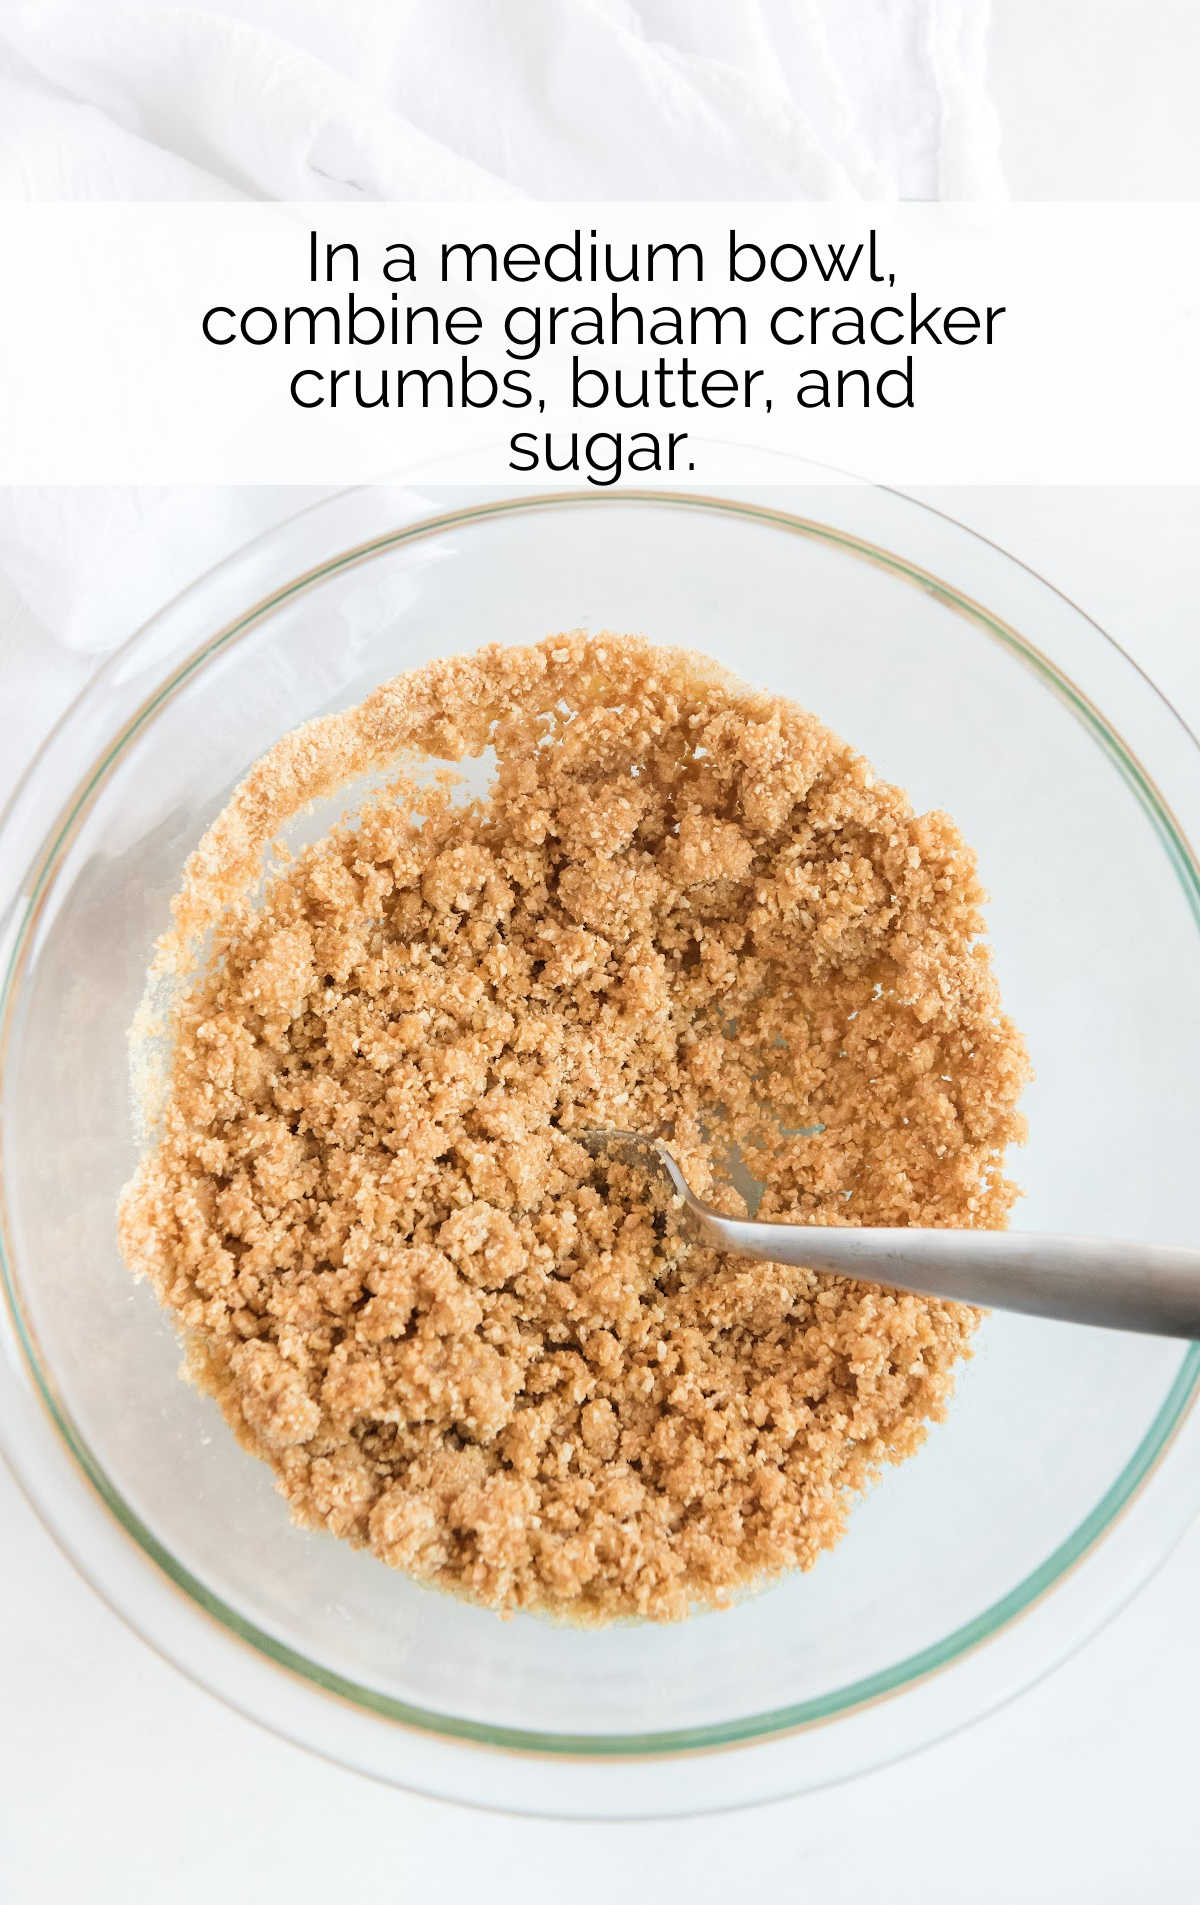 graham cracker crumbs, butter, and sugar combined in a bowl